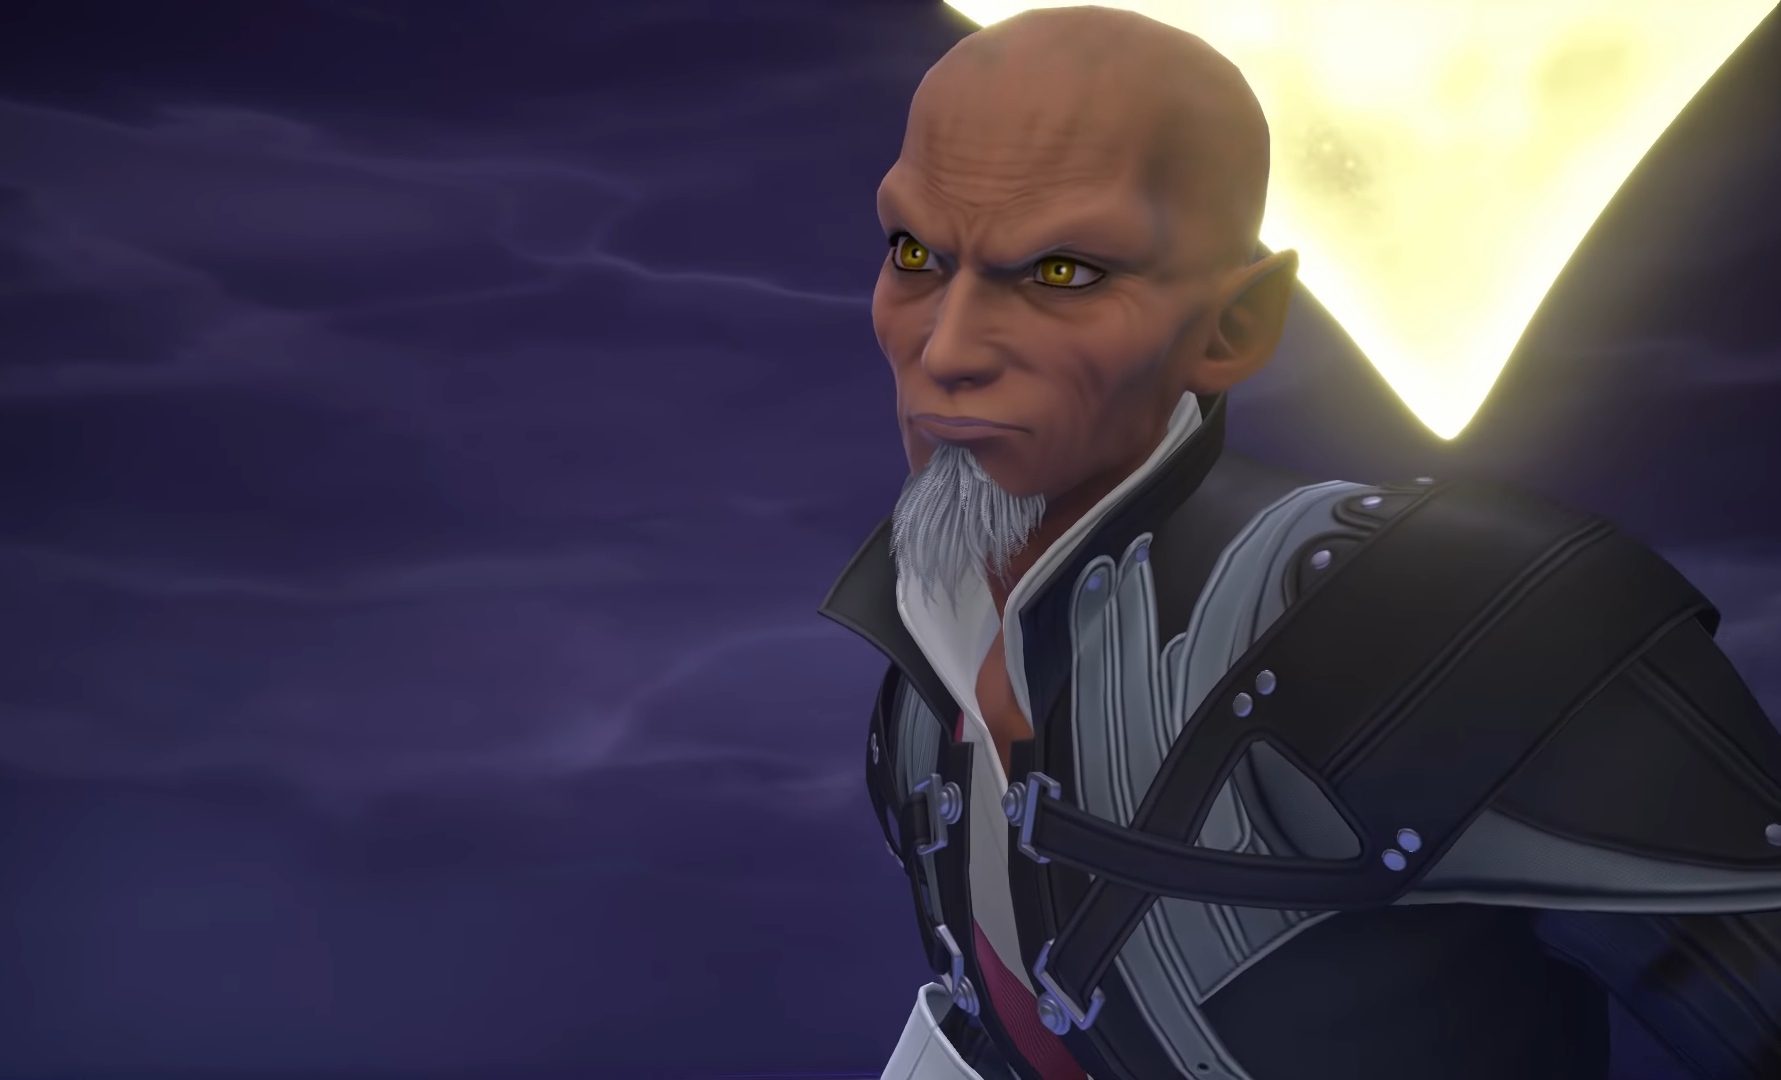 Master Xehanort is the lead antagonist